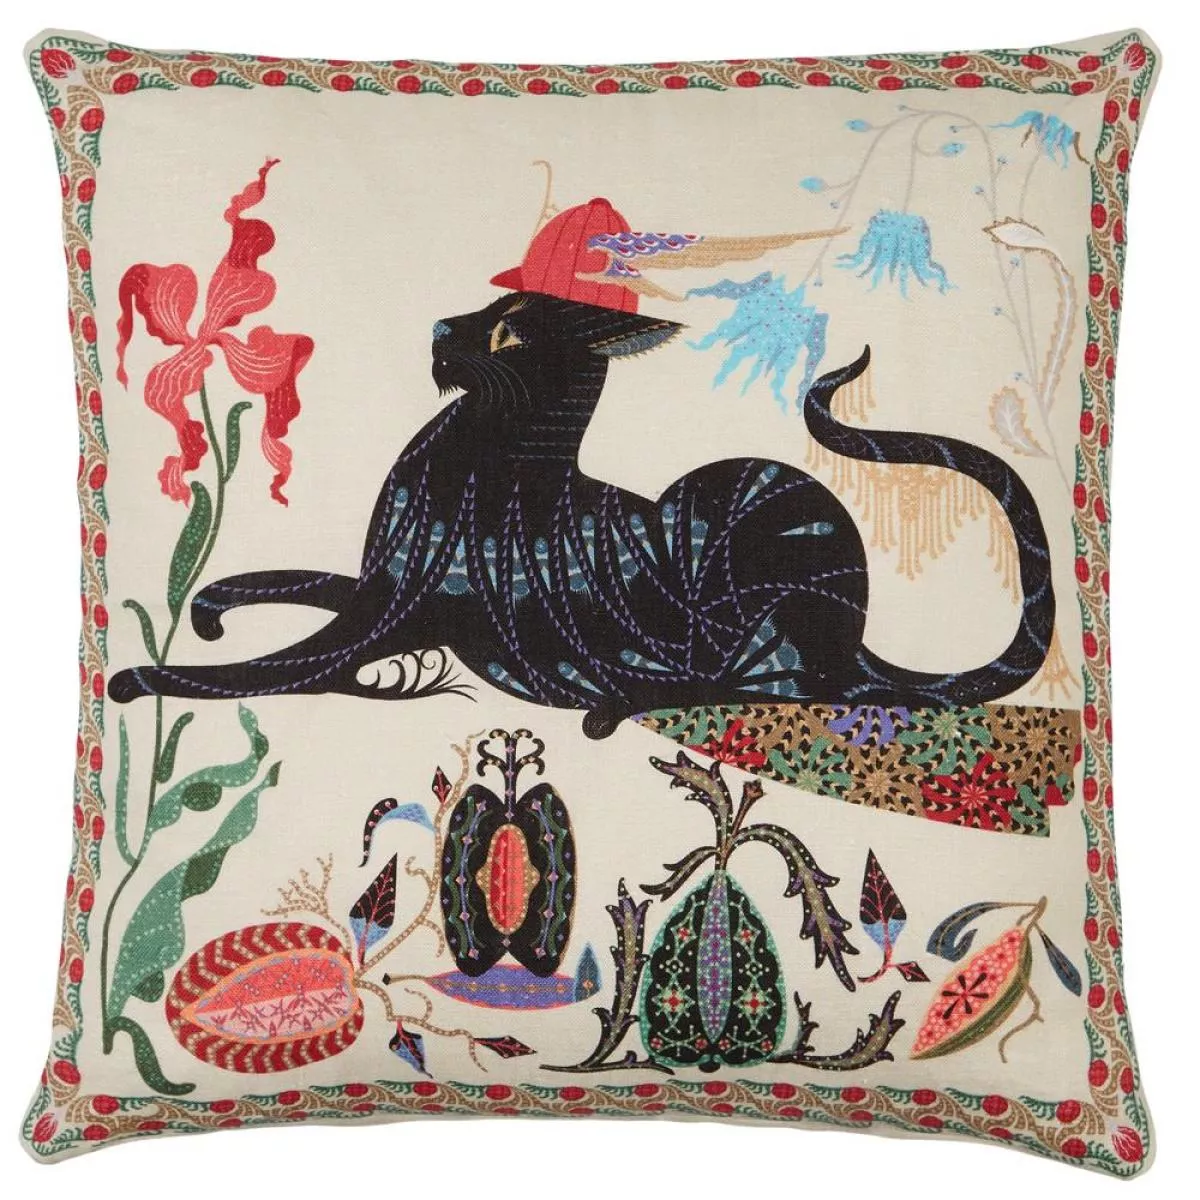 Cushion Sleeve "Putte" with Cat Print on Linen & Cotton